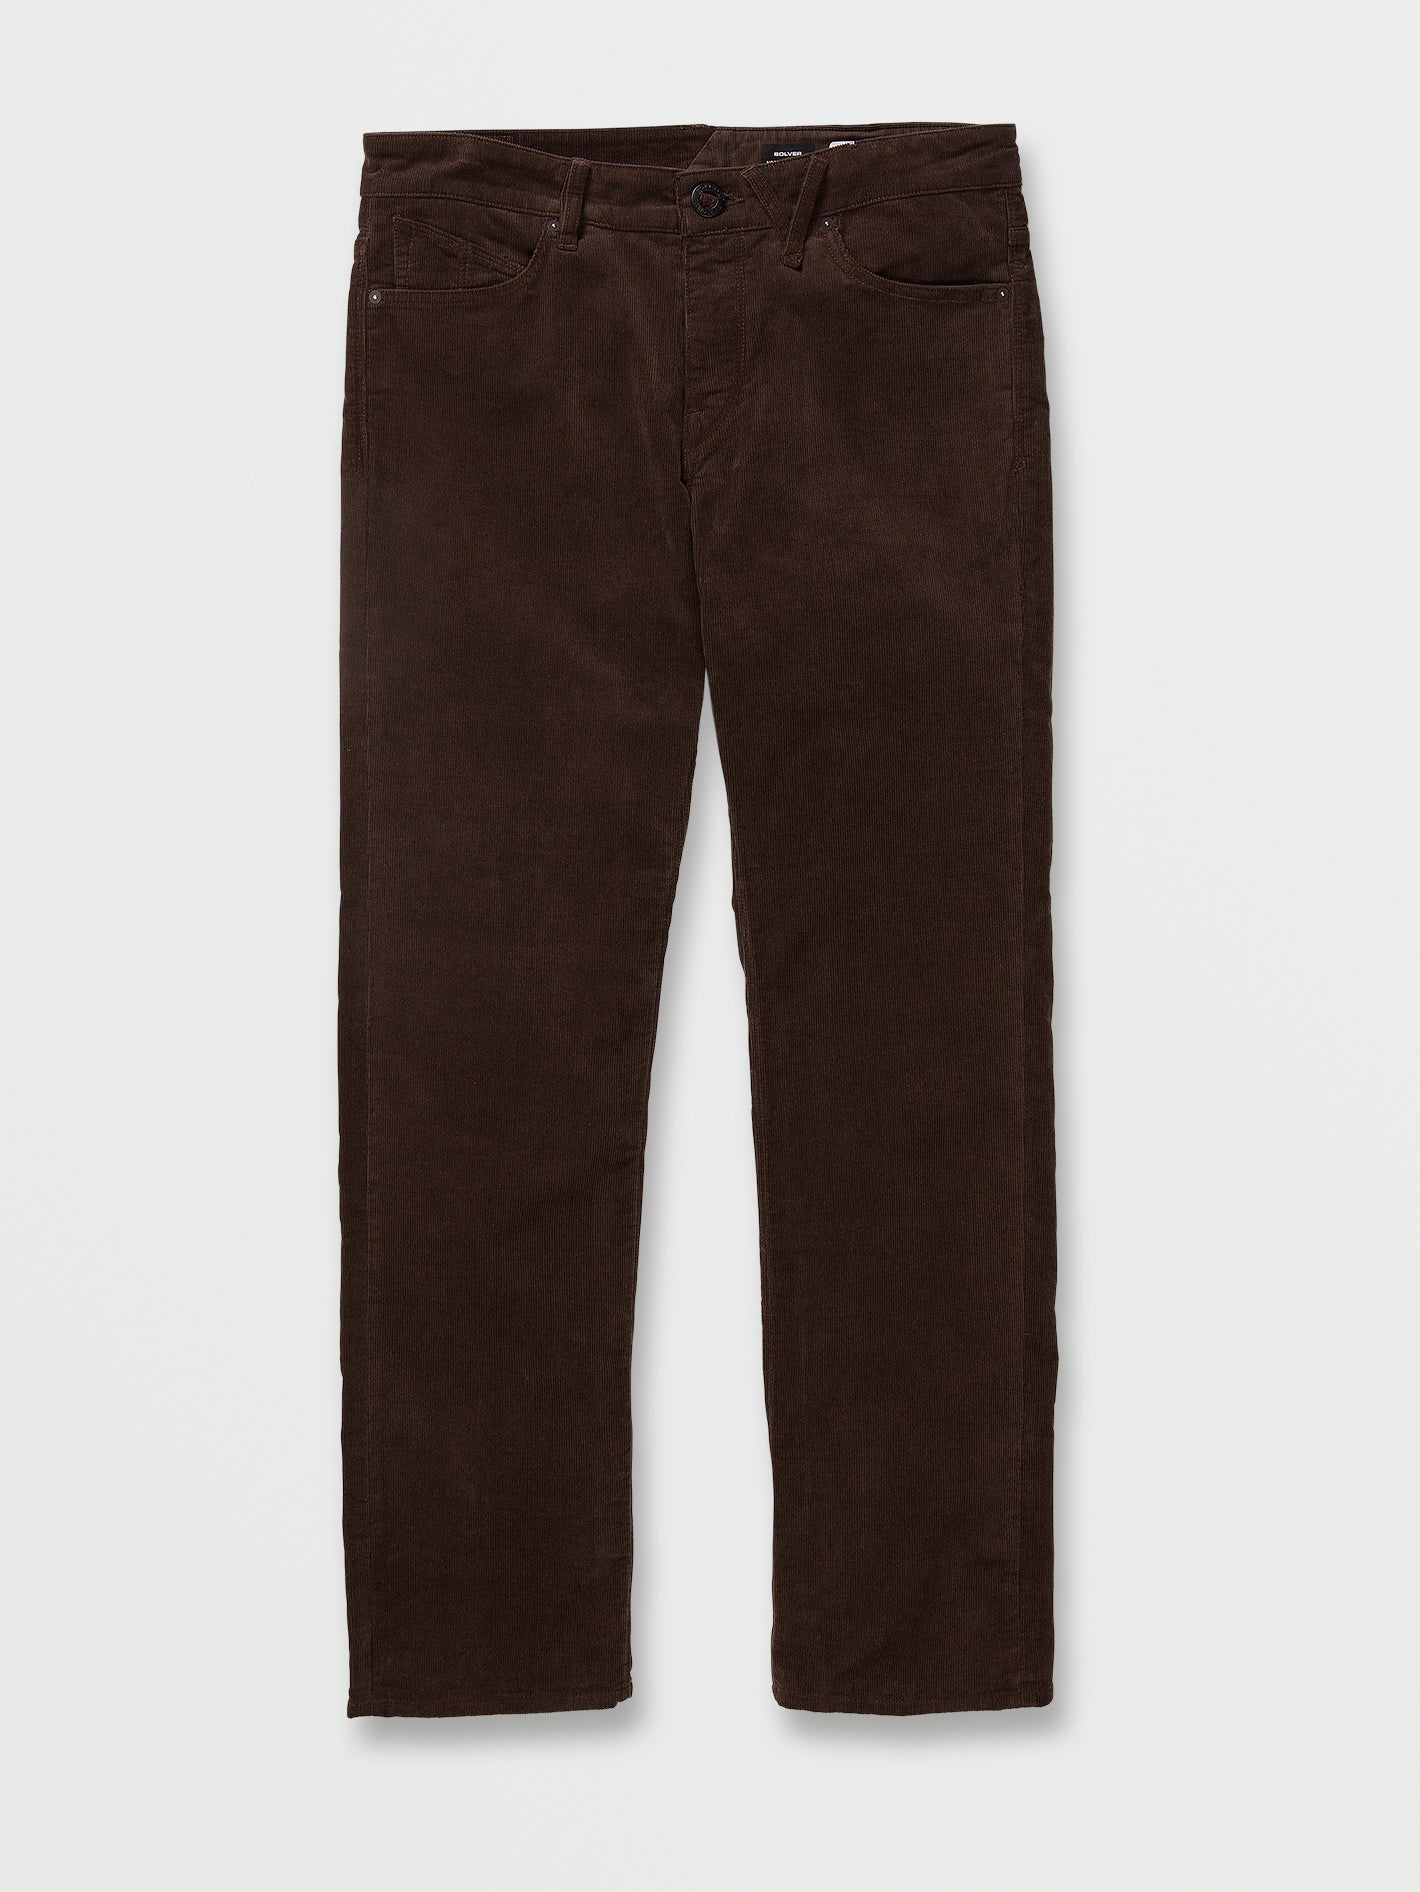 Riviera Corduroy Pant | Devium USA | Made in the USA | American Made